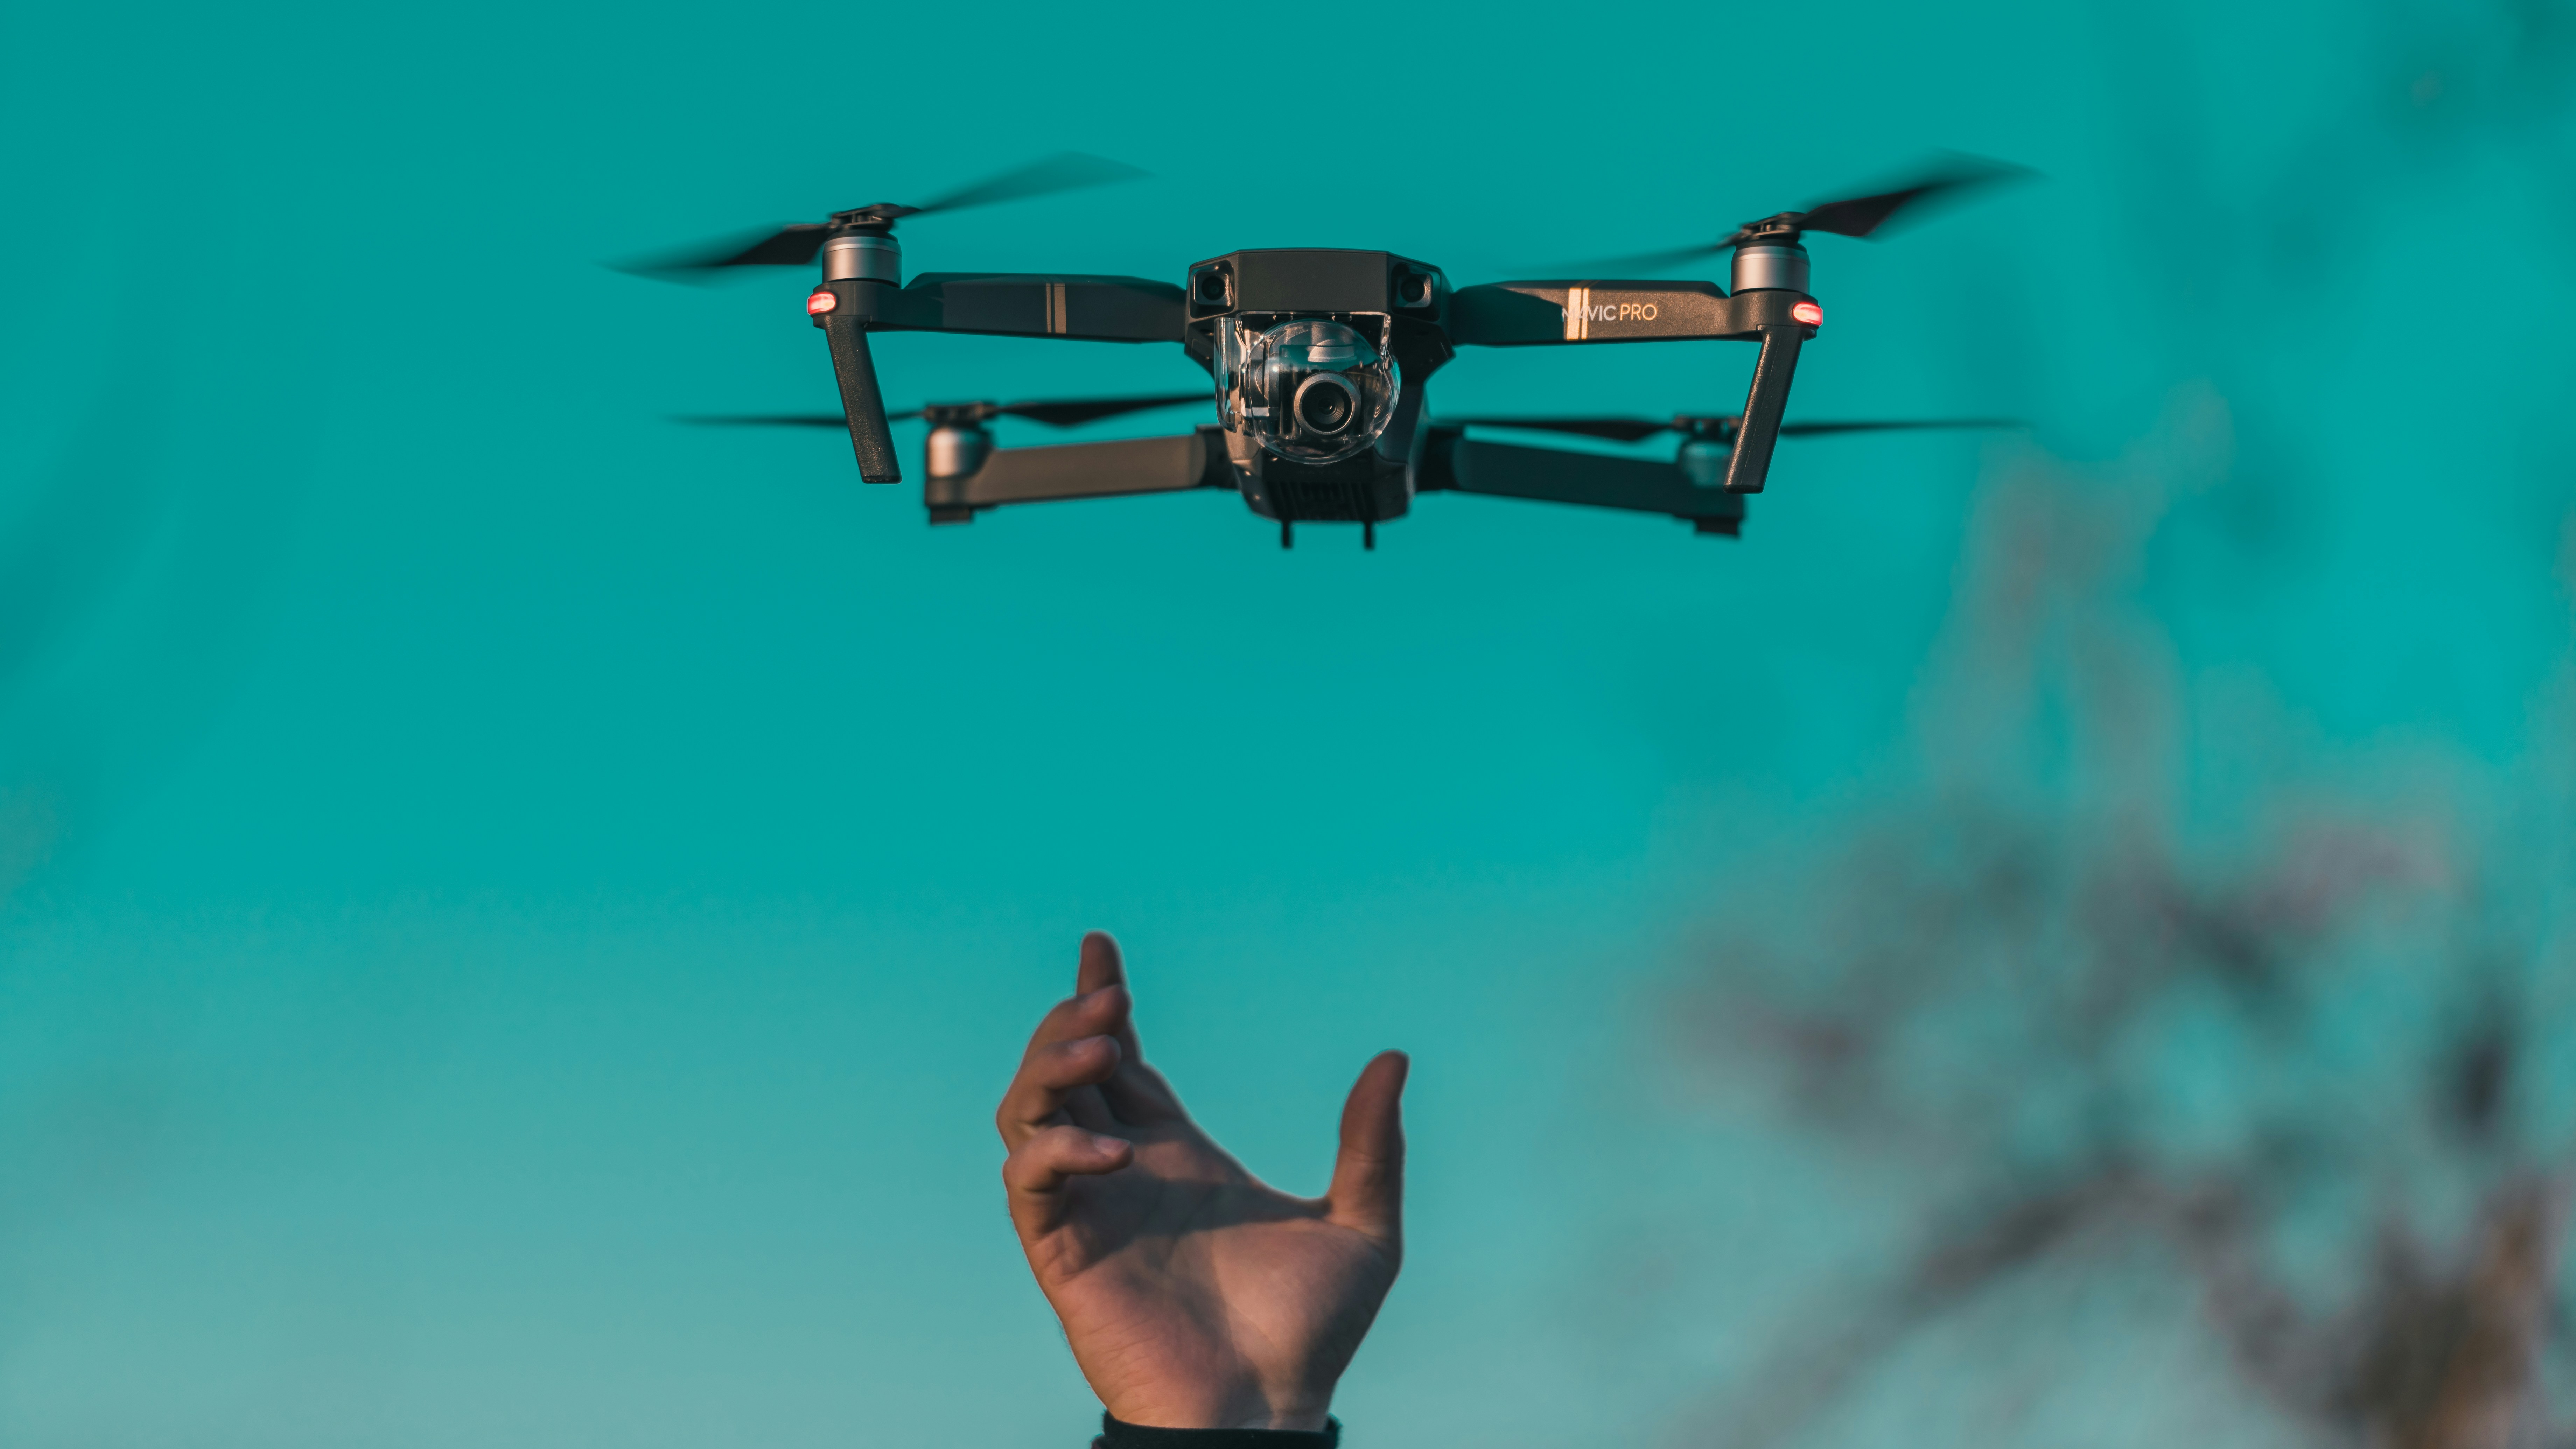 8 Best Places To Fly A Drone In Oregon In 2023? - Drone Guider